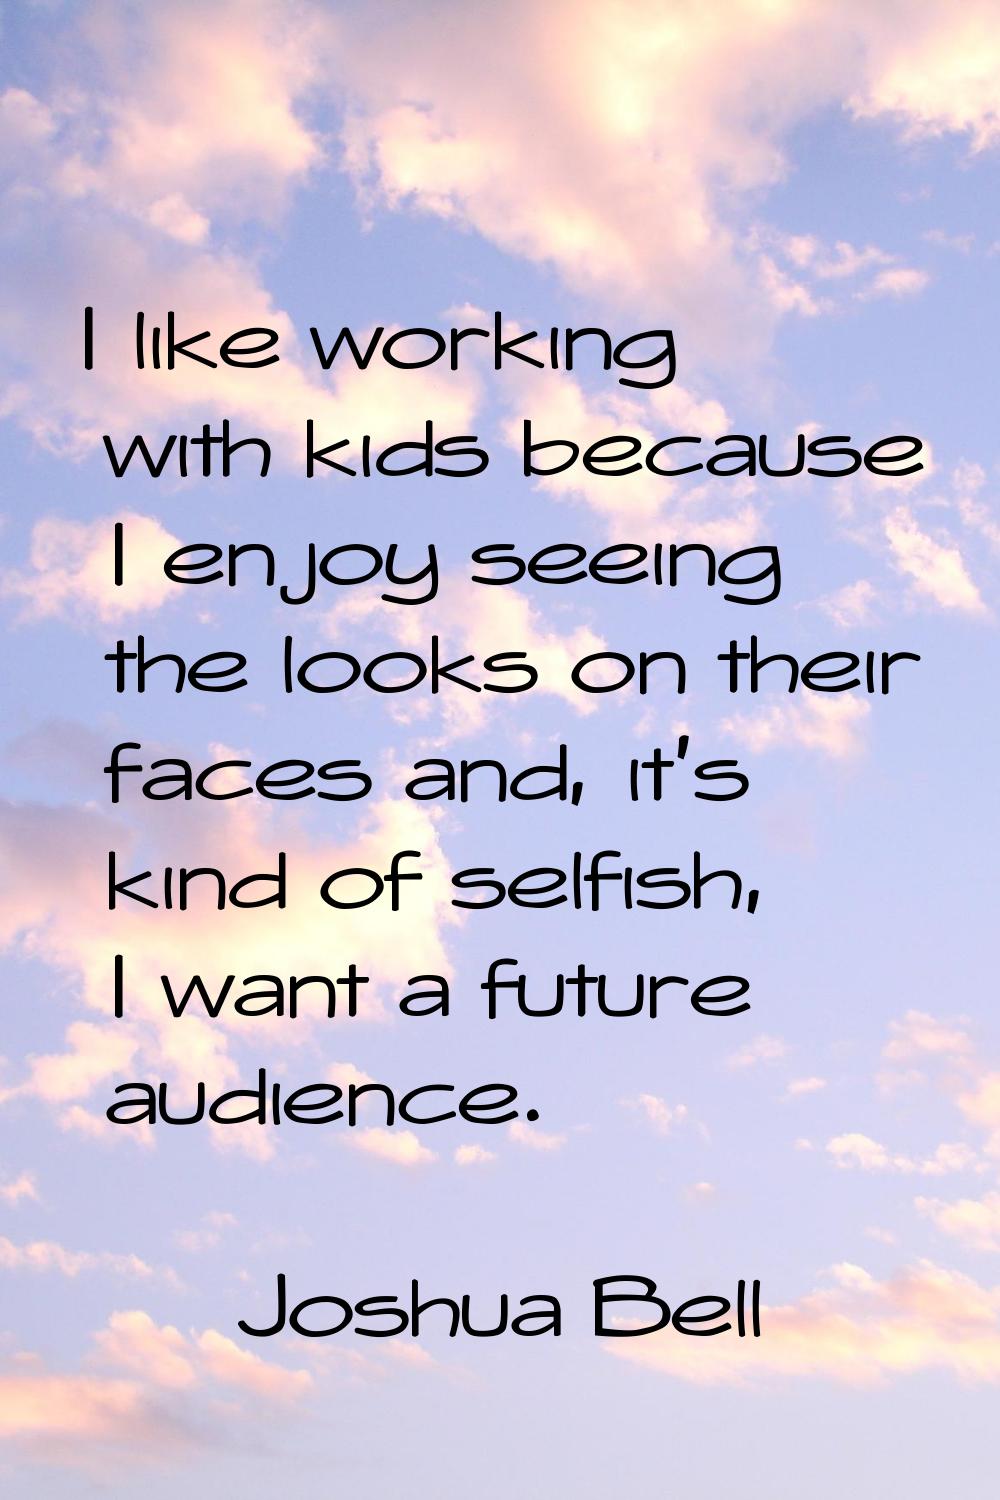 I like working with kids because I enjoy seeing the looks on their faces and, it's kind of selfish,